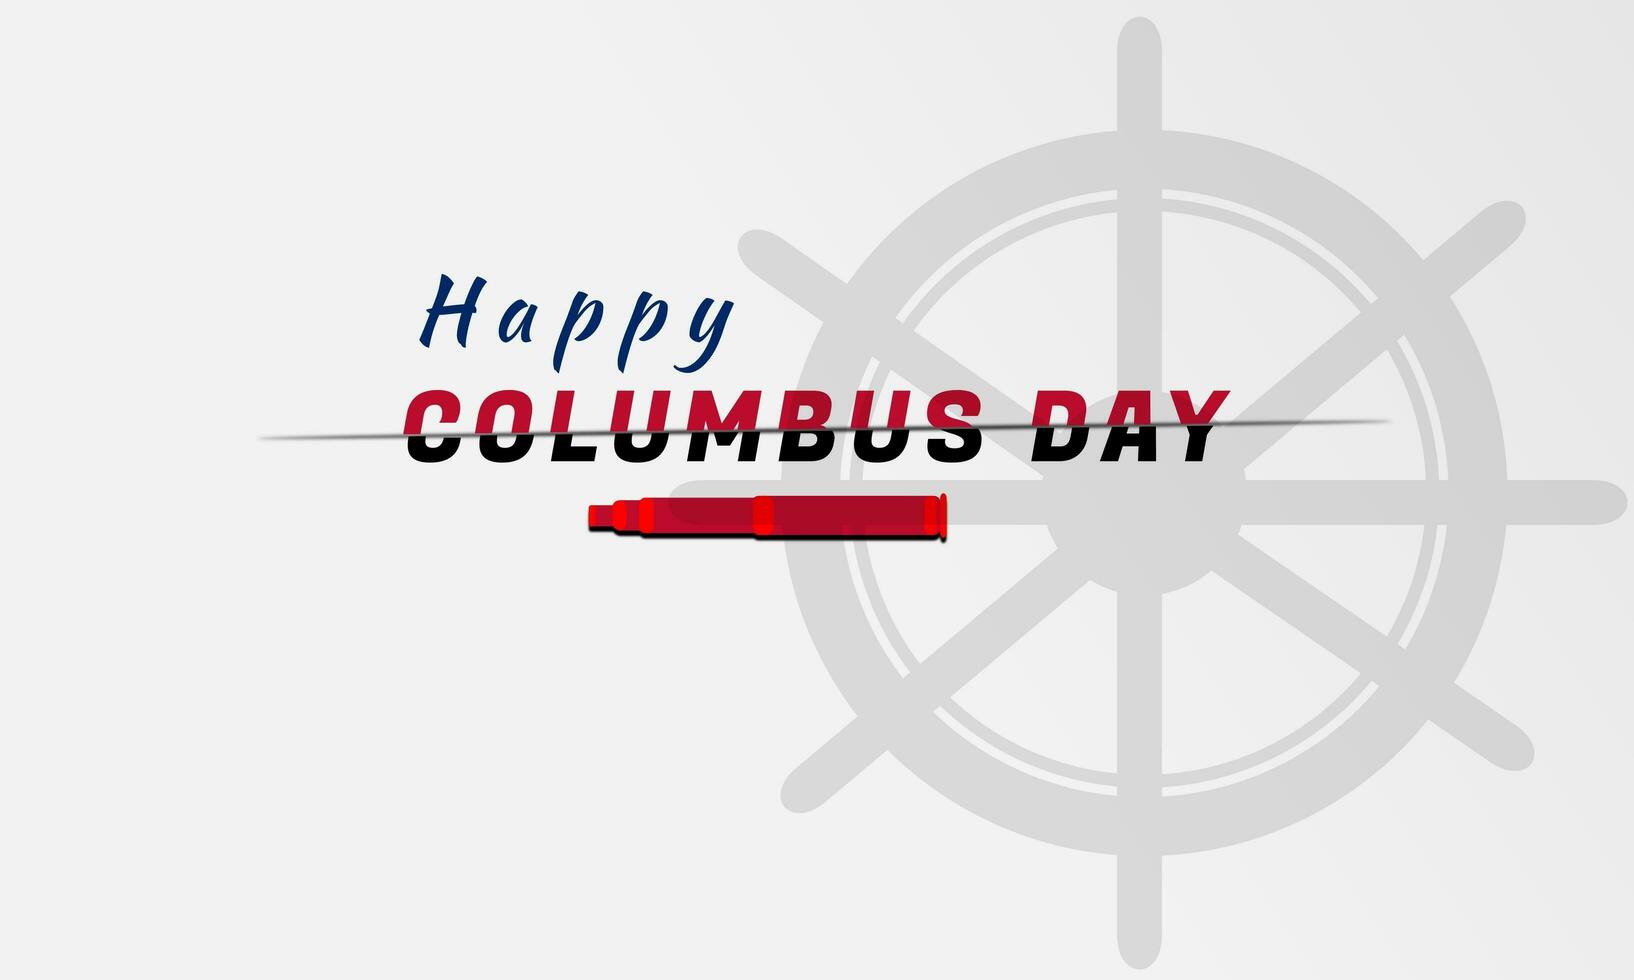 Holiday greeting card design. Happy columbus day background template with slice text effect. Vector illustration. Suitable for banner, wallpaper, sign, poster, digital photo